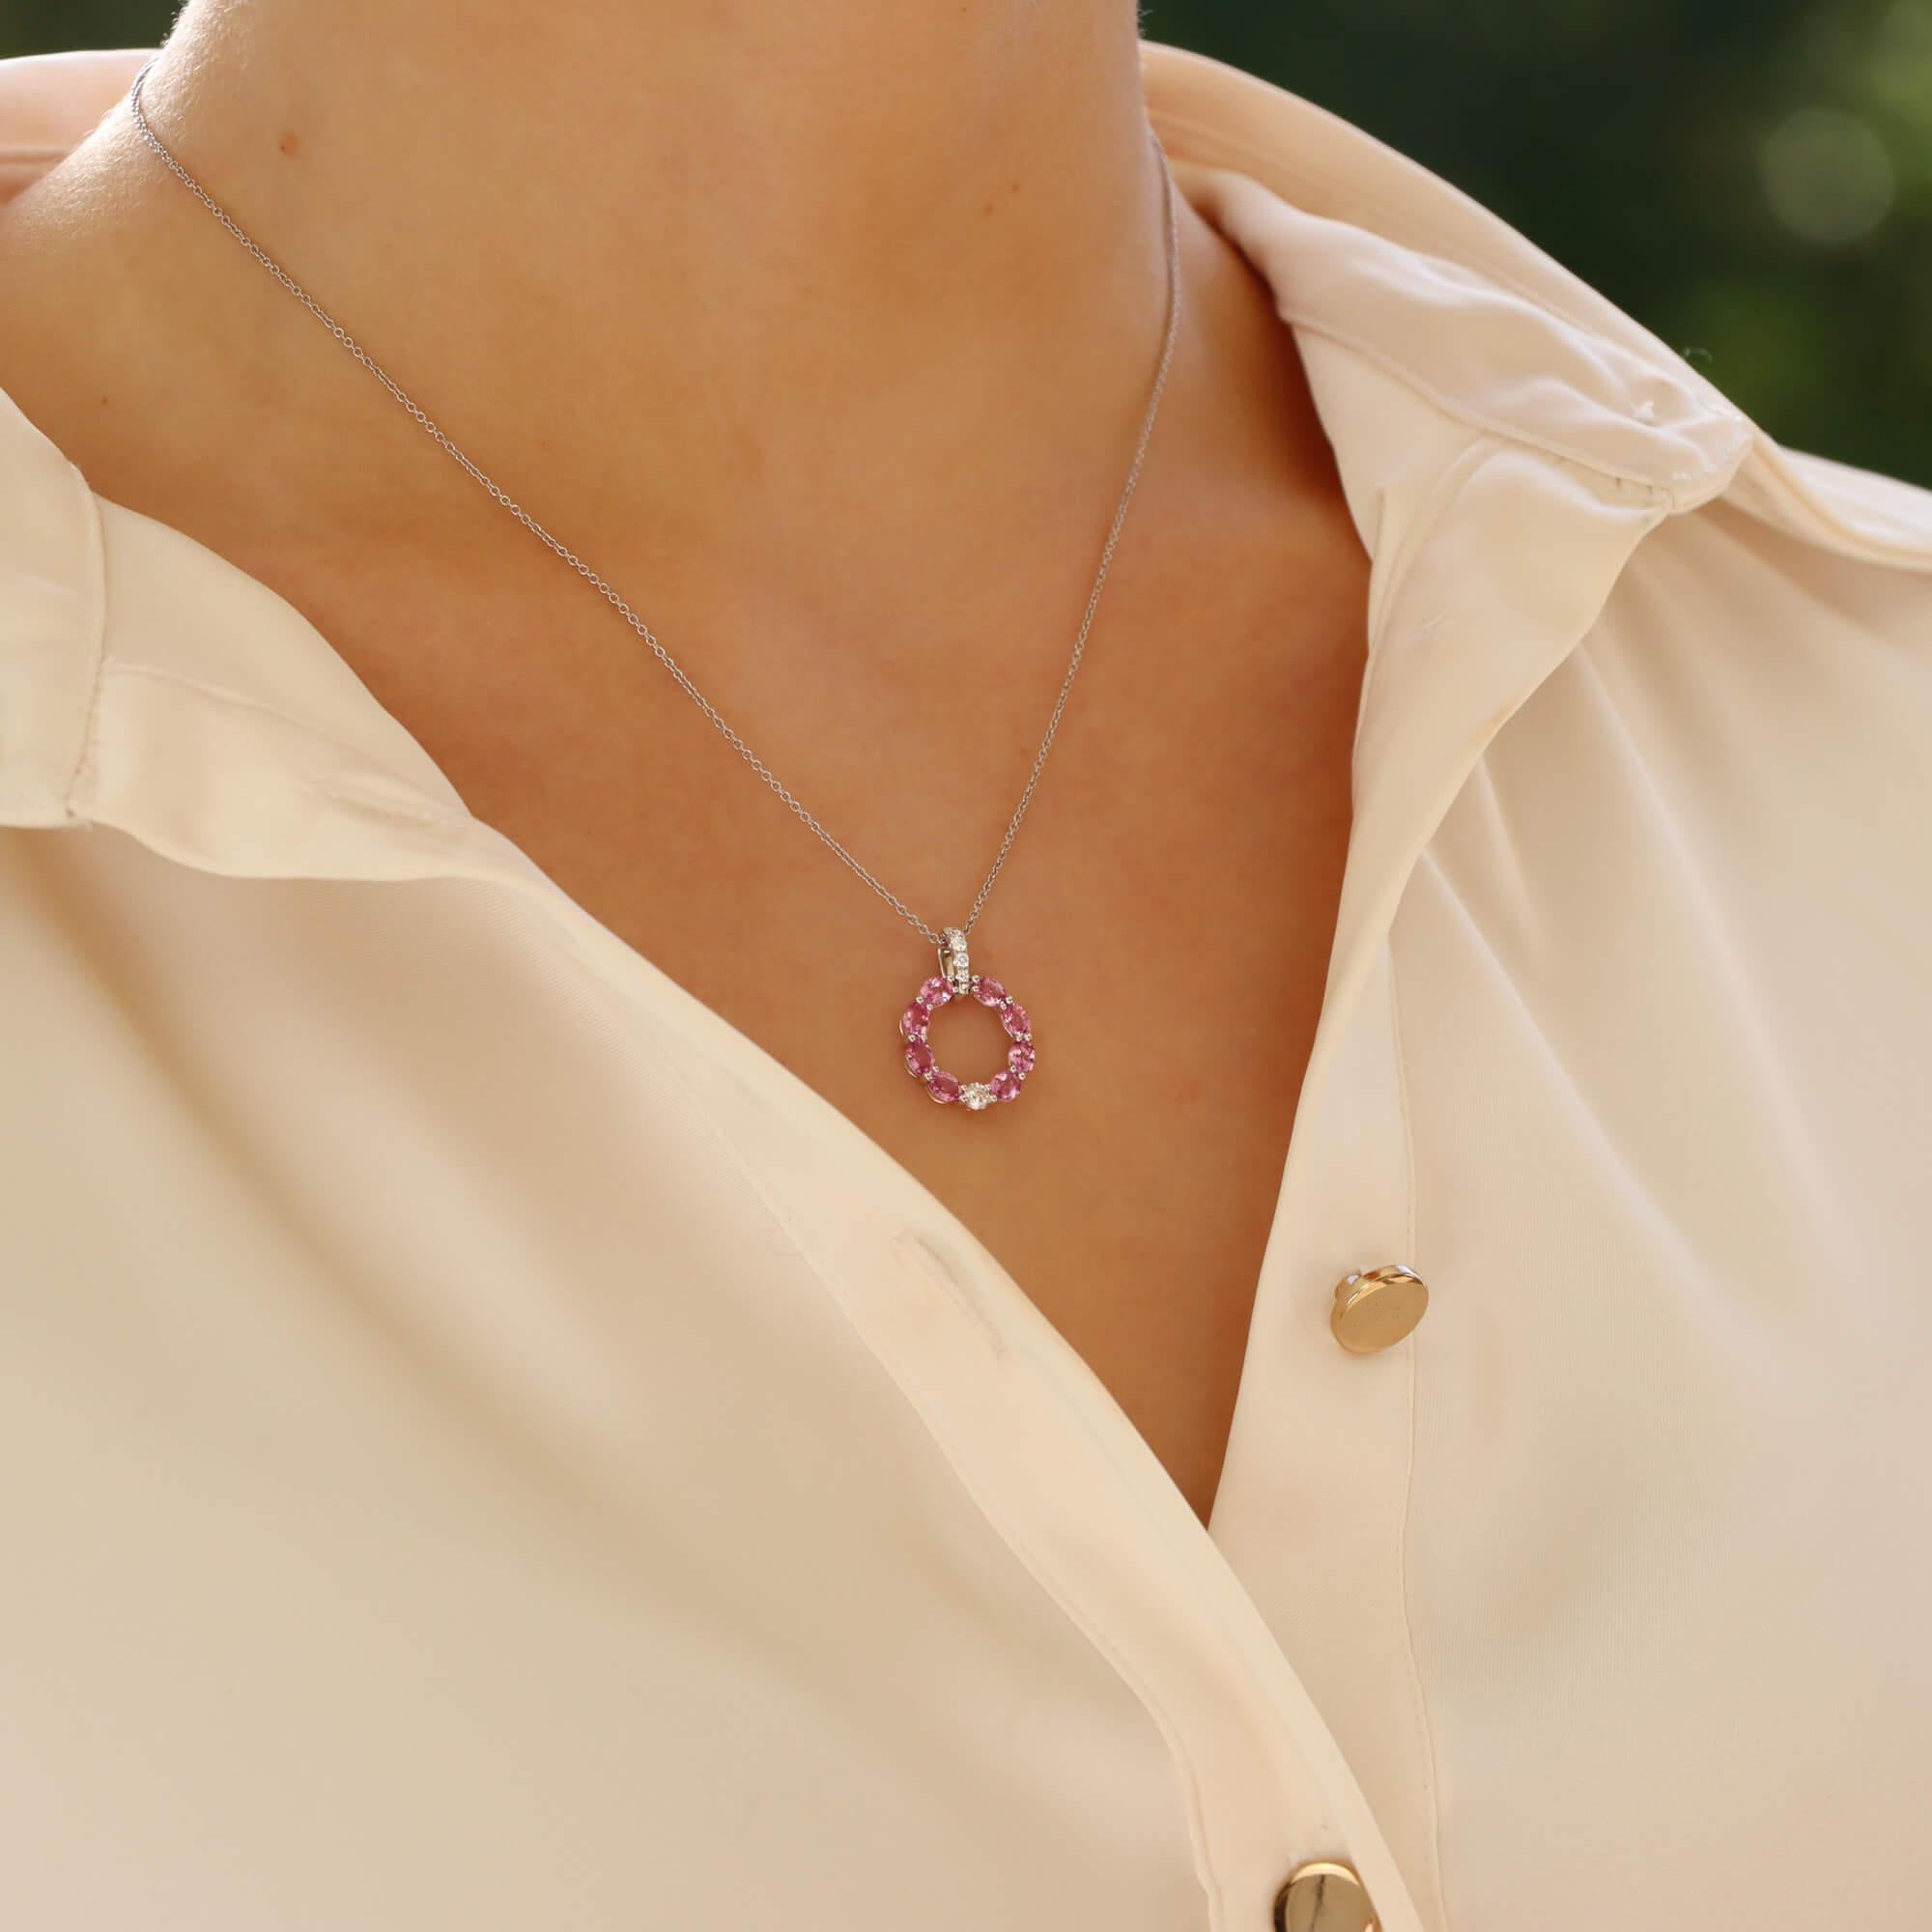 A stylish pastel pink and diamond pendant necklace set in 18k white gold.

The pendant is composed in a white gold hoop and is set throughout with oval cut pastel pink sapphires; all of which are perfectly matched in colour and lustre. The hoop